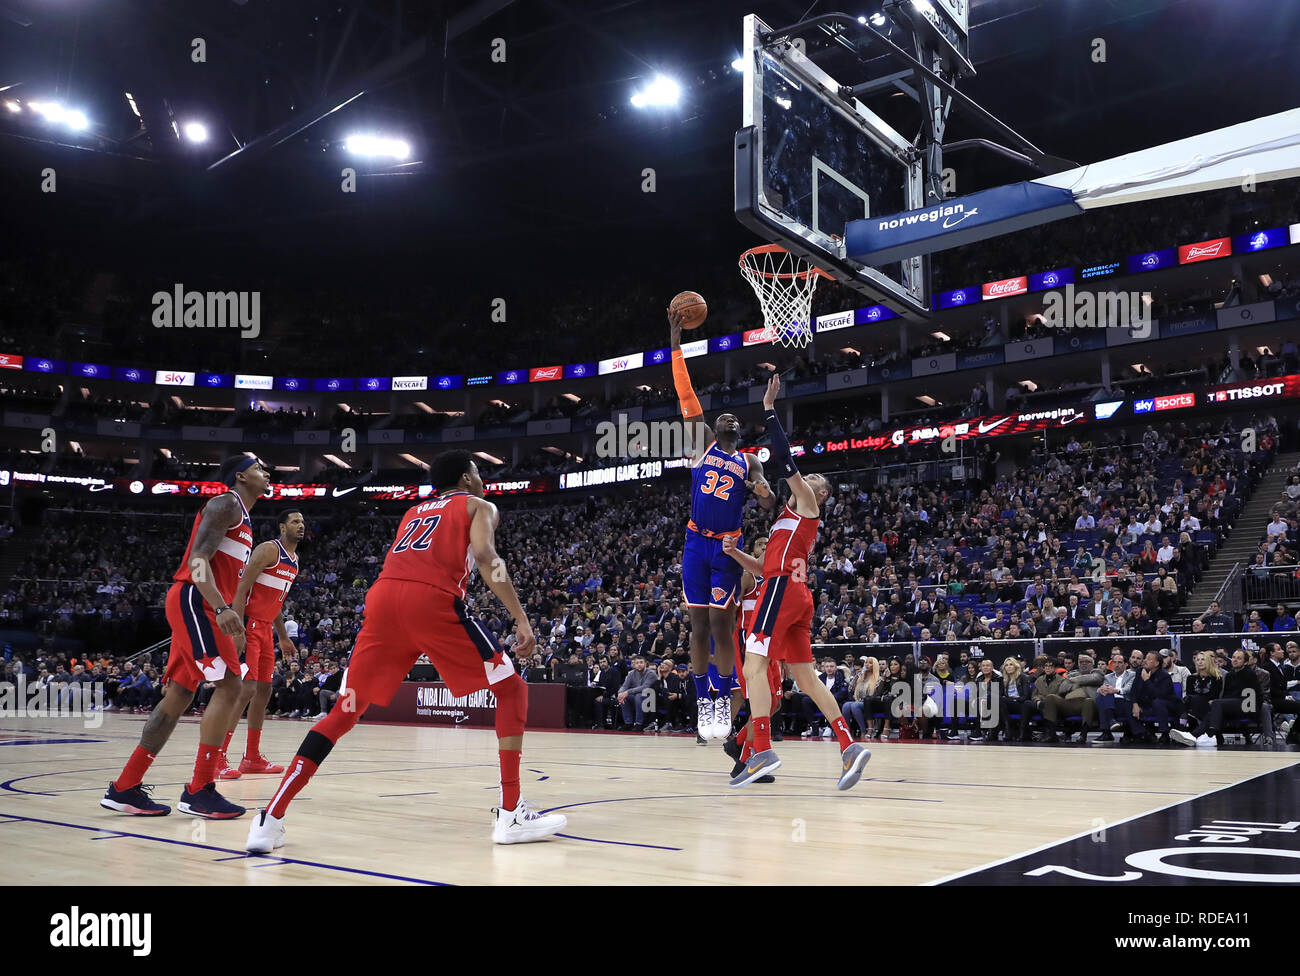 Nba basketball hoop hi-res stock photography and images - Alamy